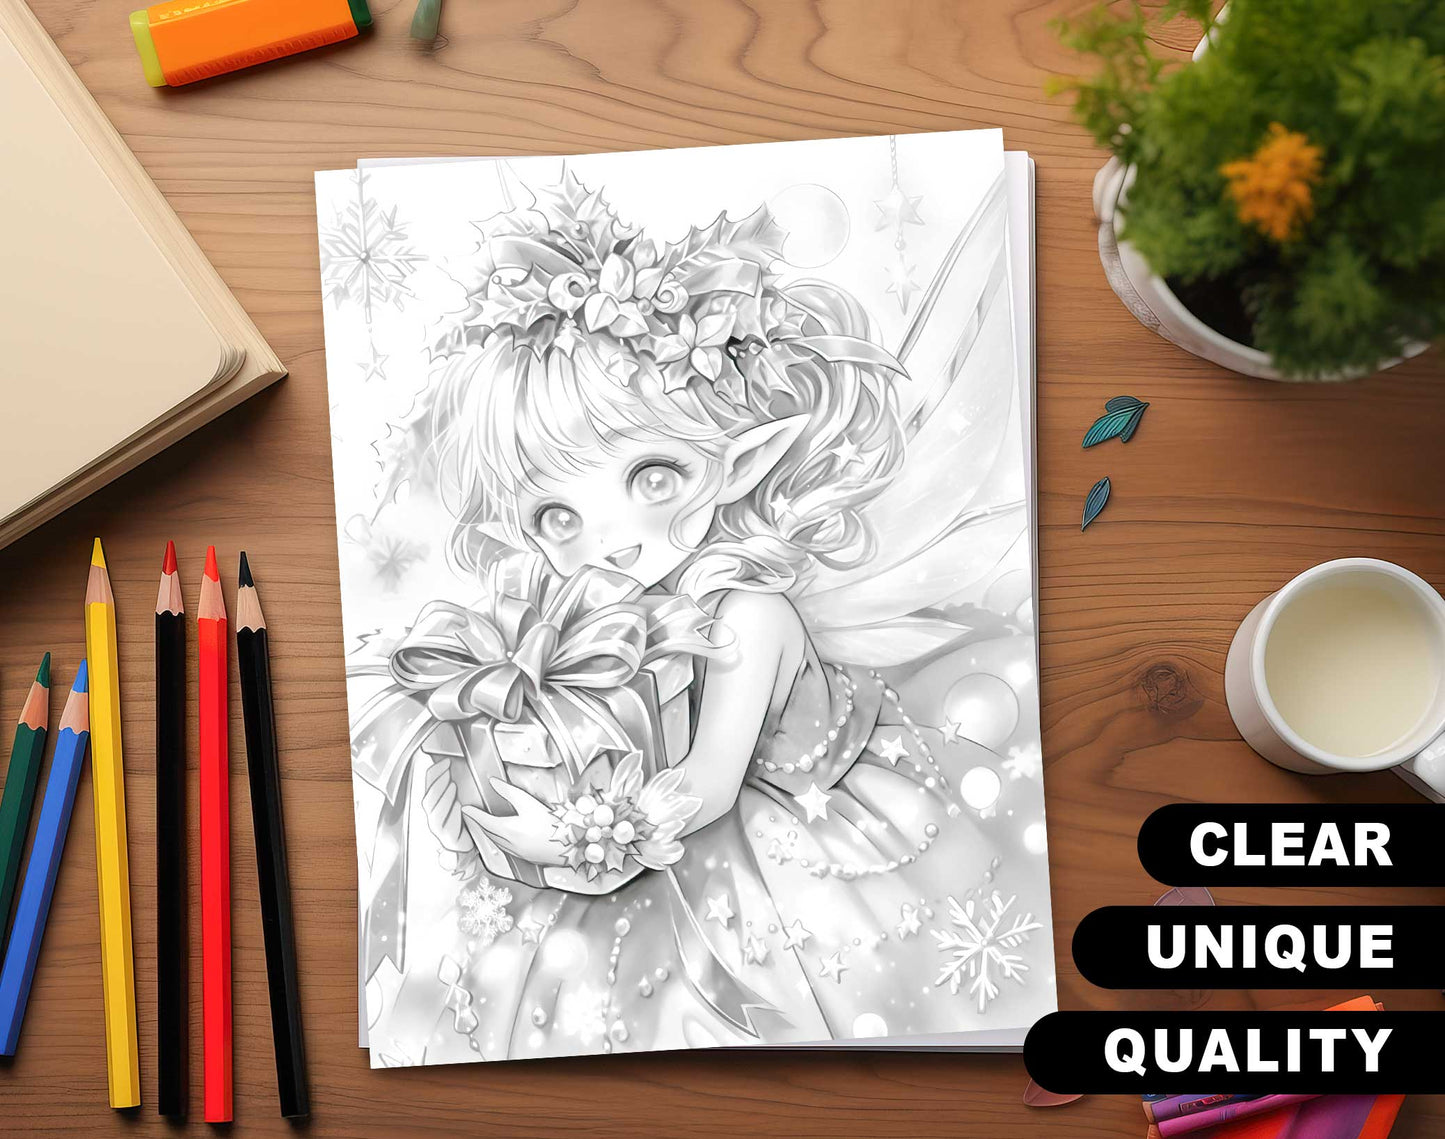 50 Christmas Darlings Grayscale Coloring Pages - Instant Download - Printable Dark/Light